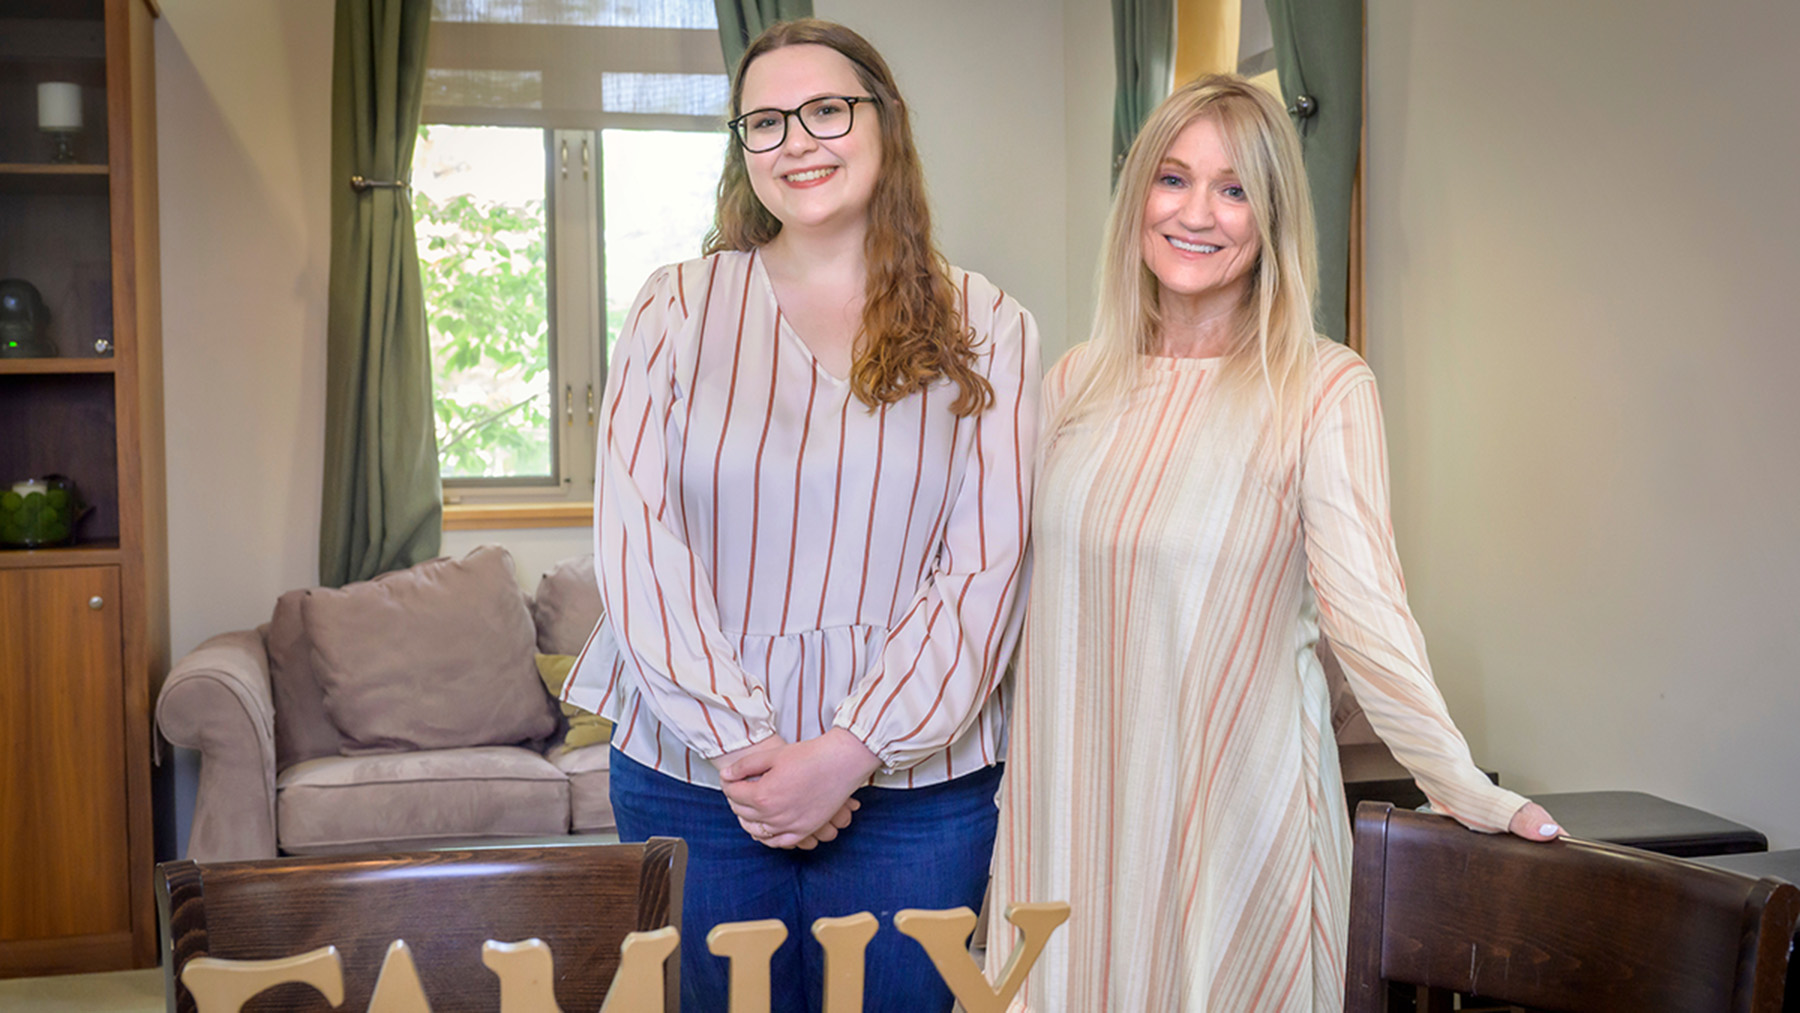 Graduate student Samantha Iwinski and Kelly Bost, a professor of human development and family studies, were co-authors of the study.  Photo by Fred Zwicky